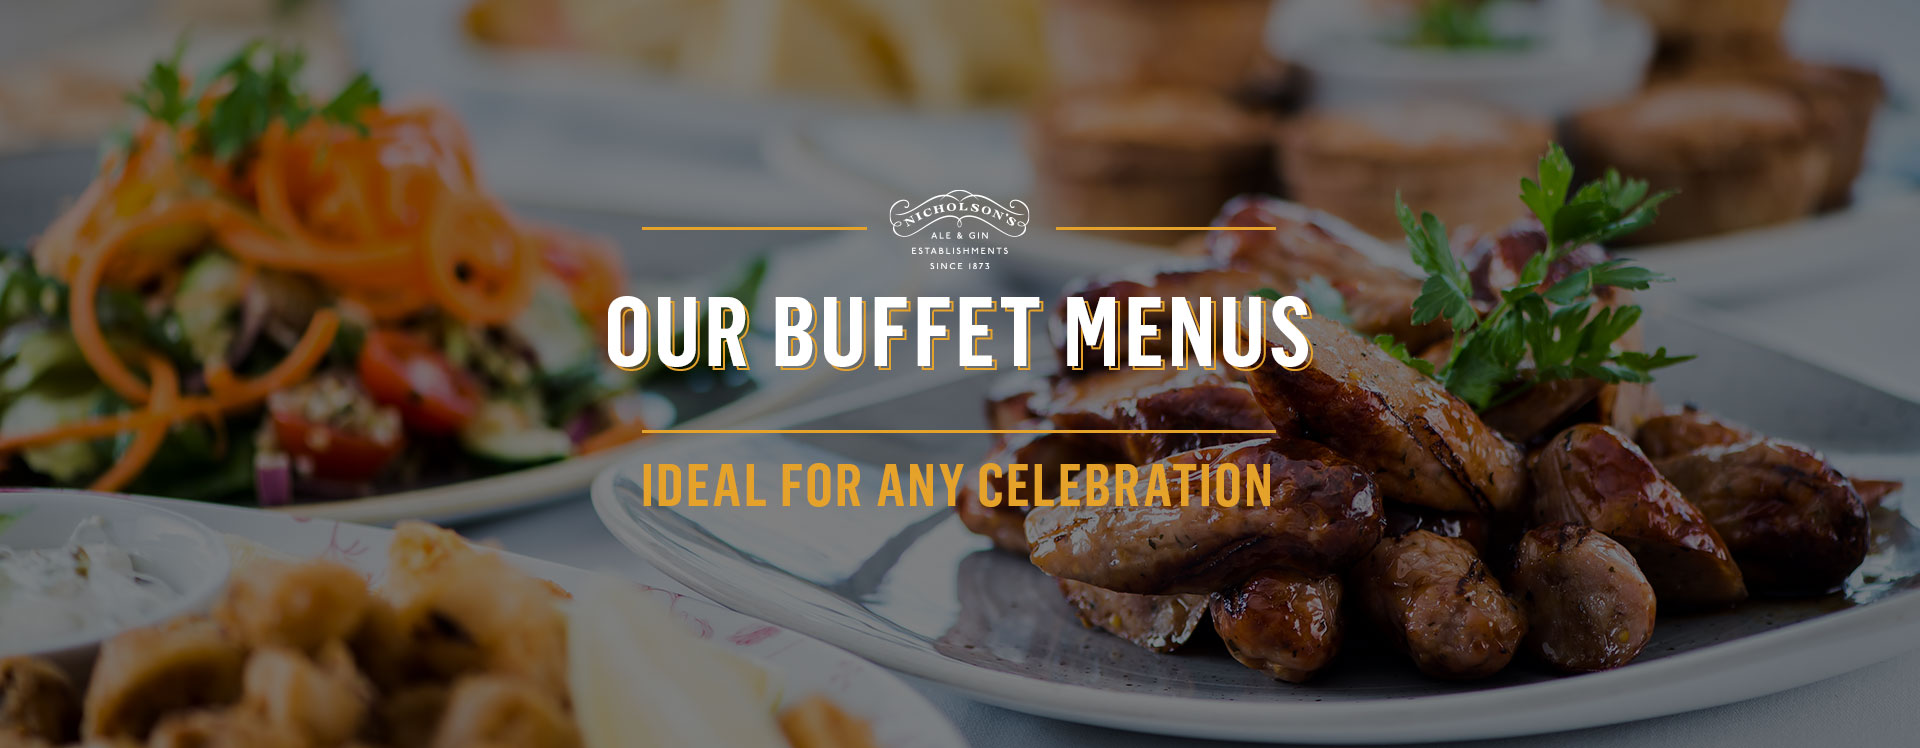 Buffet menu at The Argyll Arms - Book a table